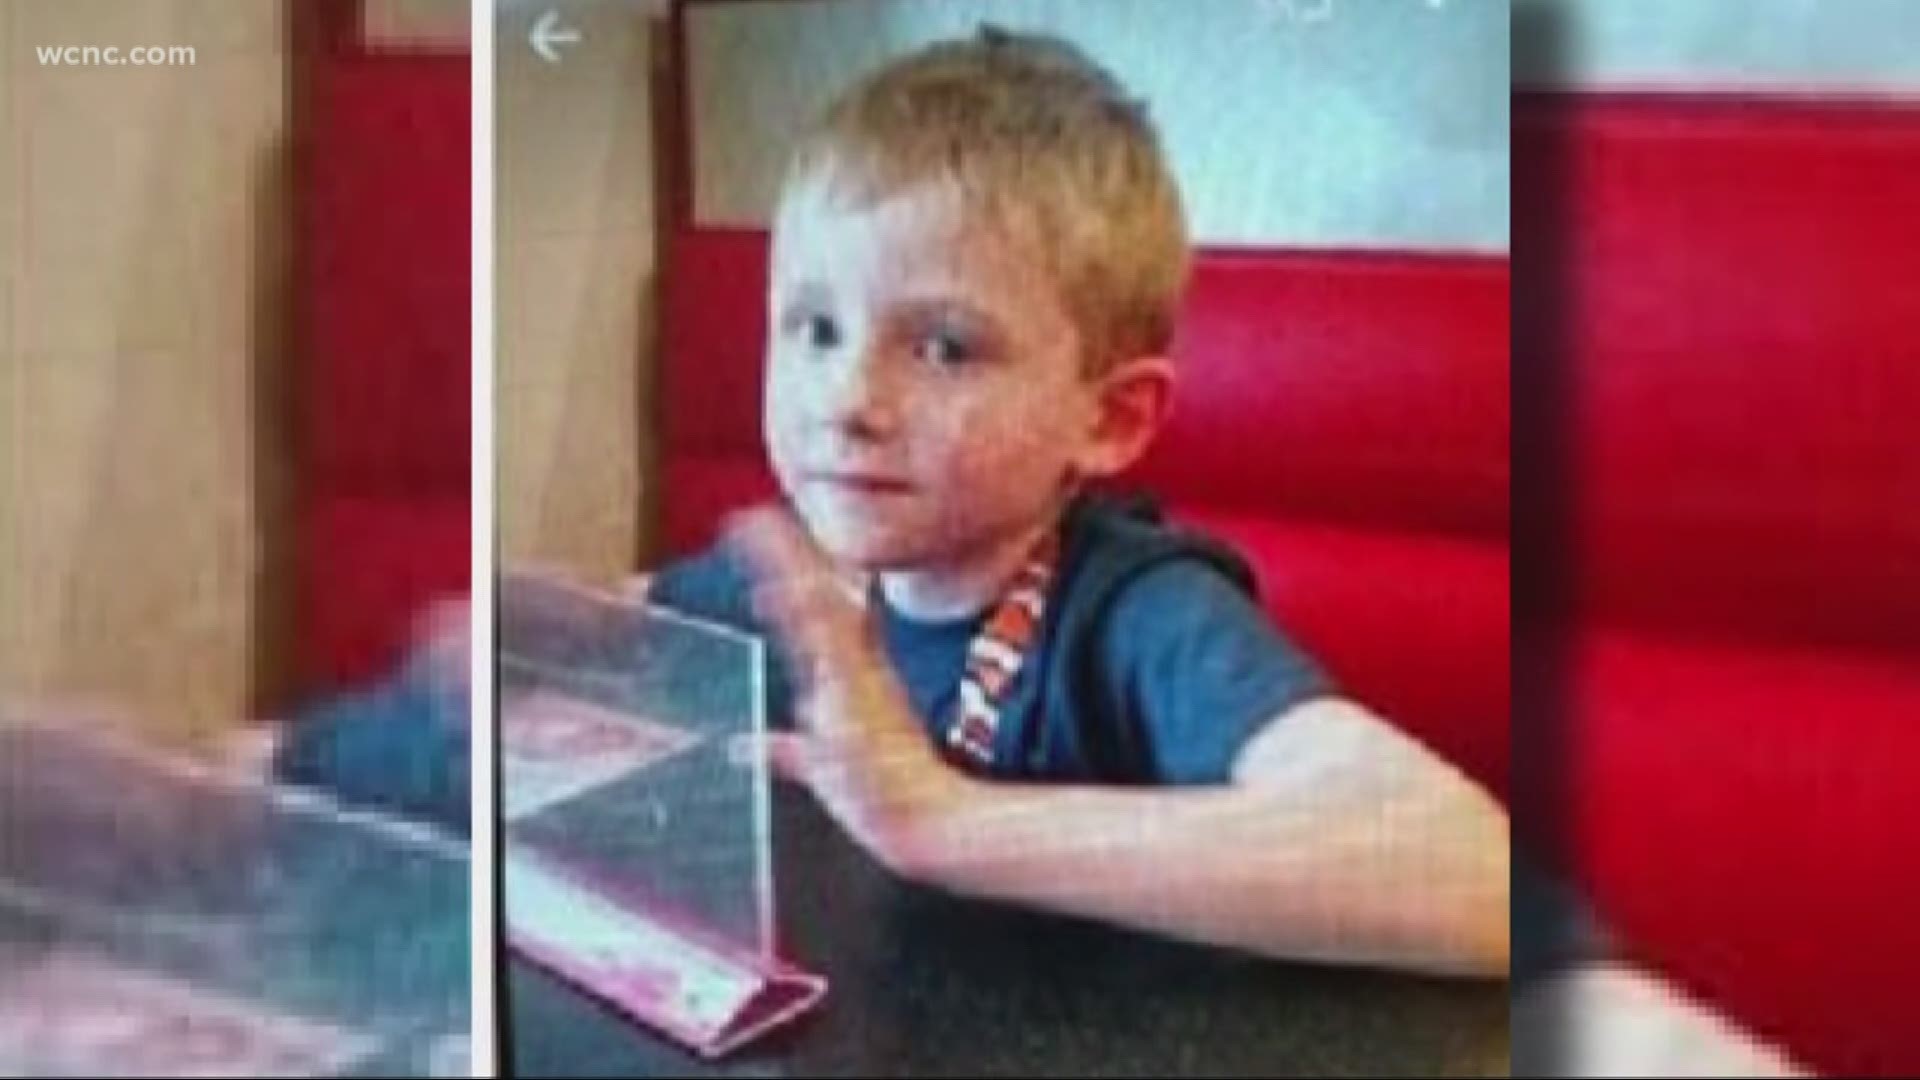 The little boy, who had autism, disappeared at Rankin Lake Park in Gaston County in September. His body was found days later in a nearby creek.